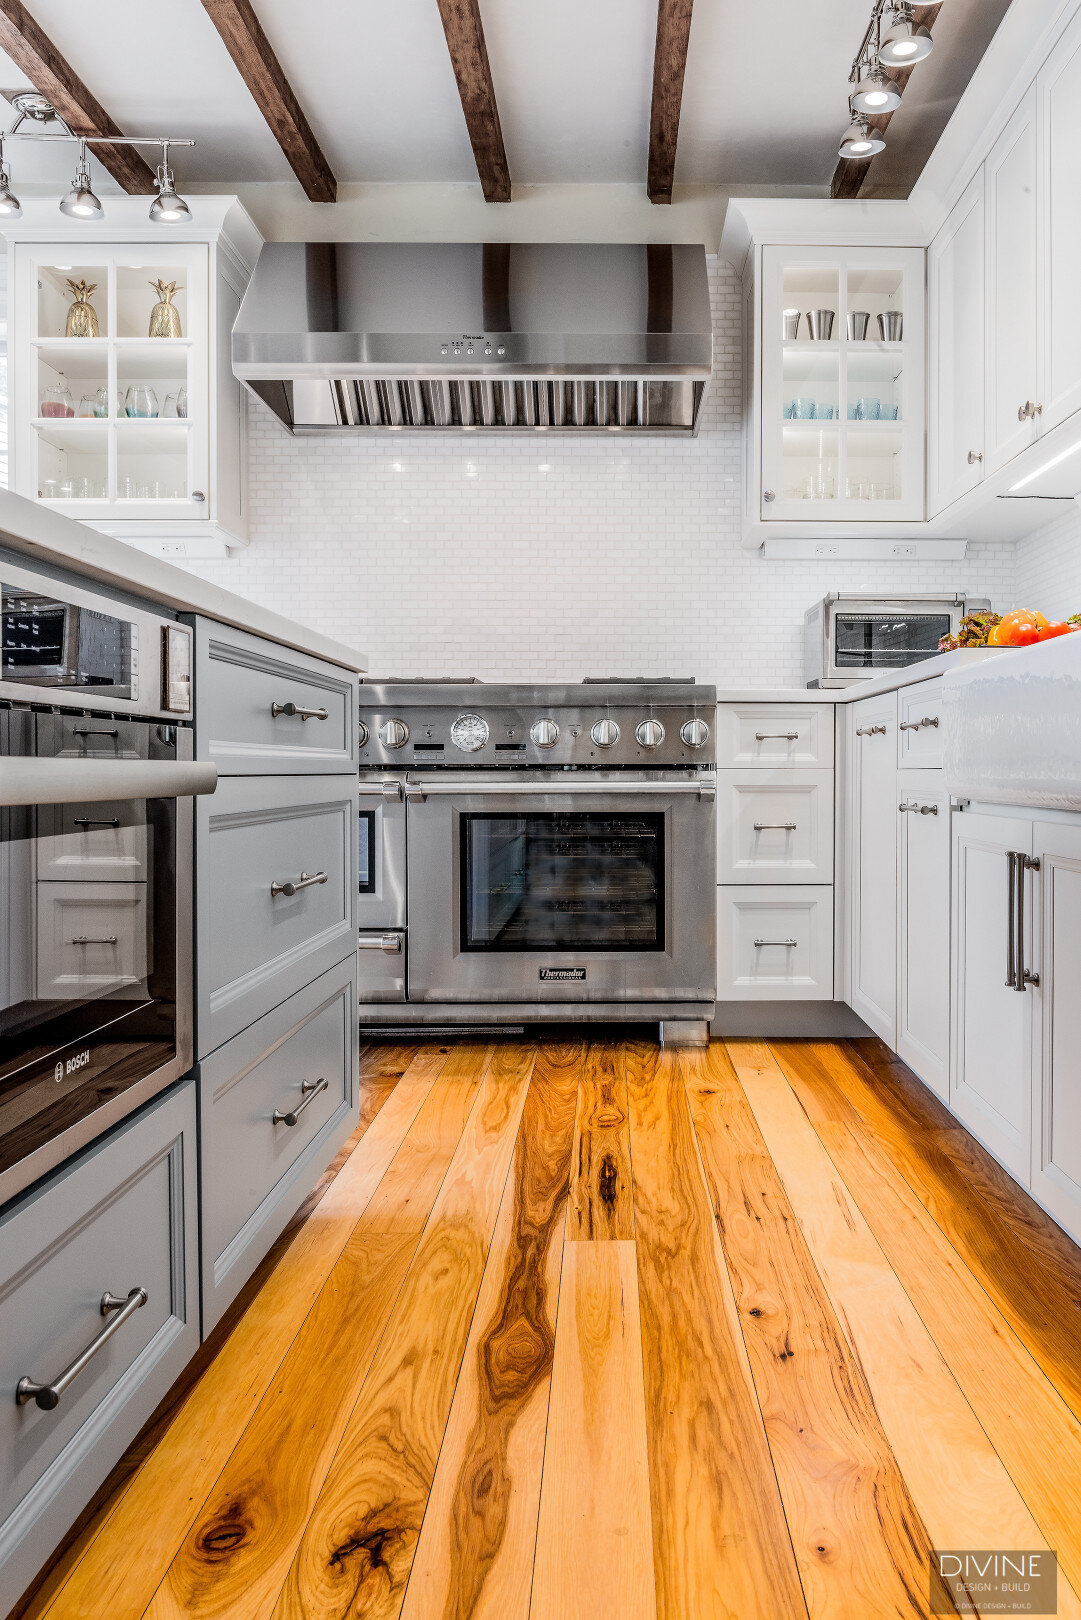 white, shaker style cabinets with brushed nickel accessories, white mosaic subway tile backsplash, cambria countertops with light marbling in grey tone. Thermador gas range, hood, and oven